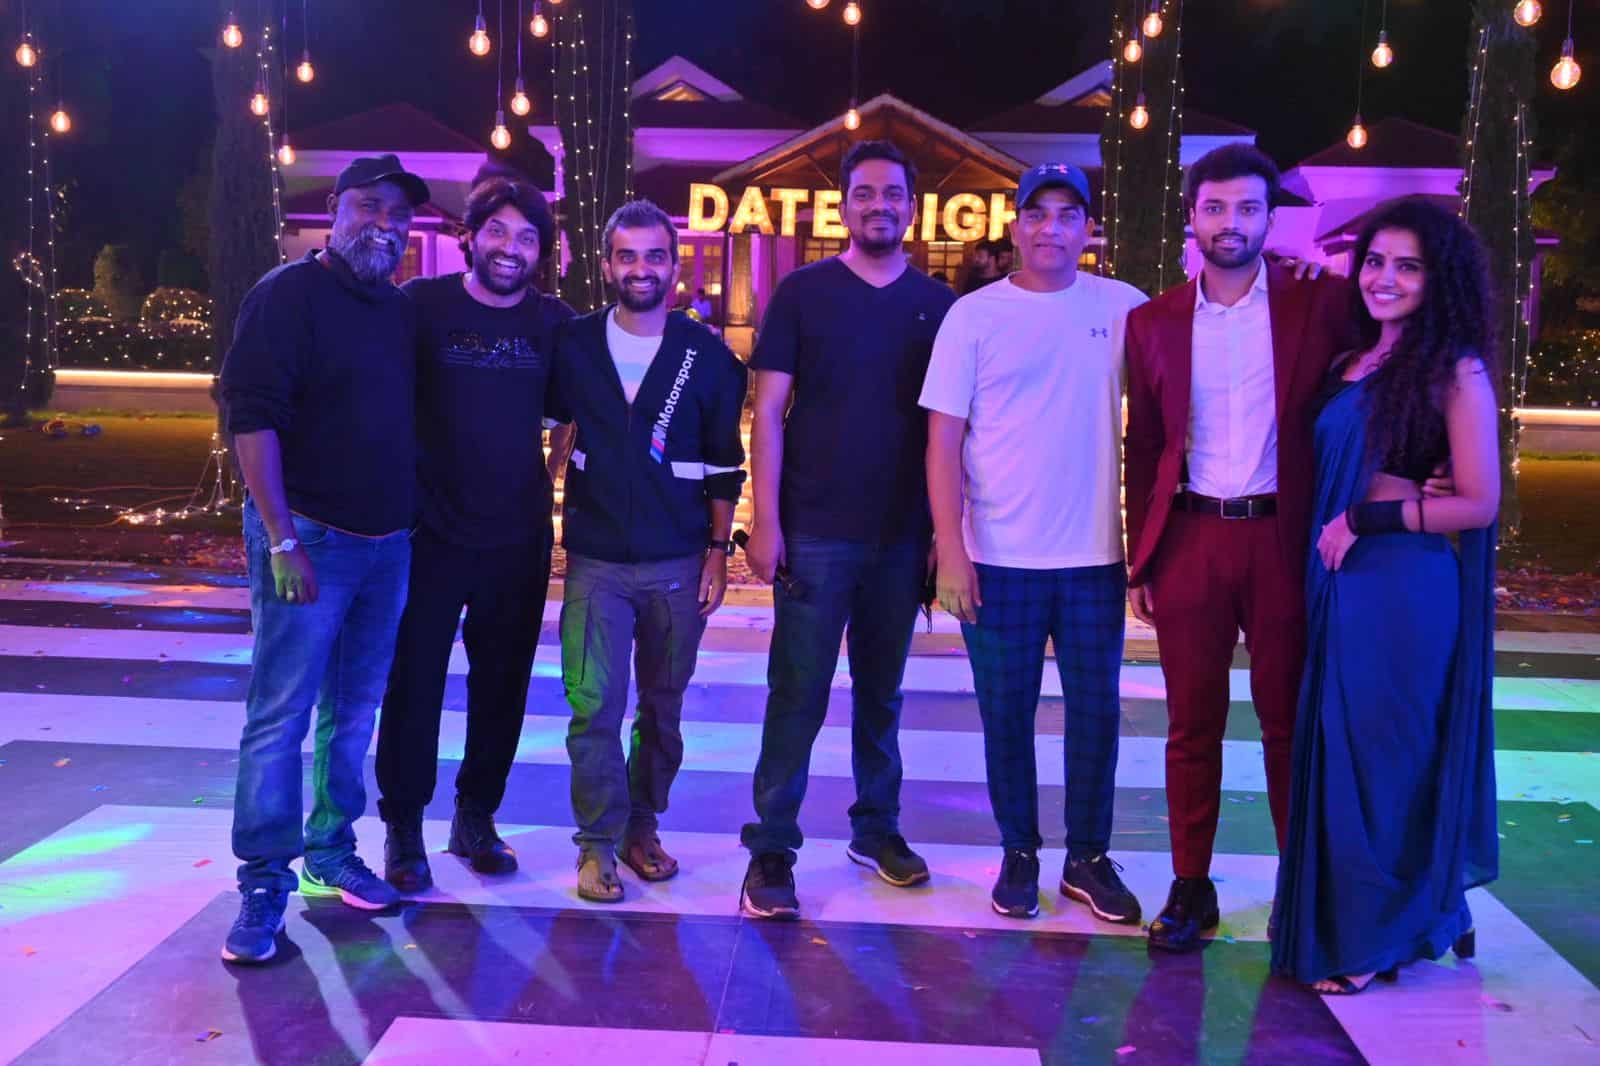 Rowdy Boys shoot ends with a college date night song